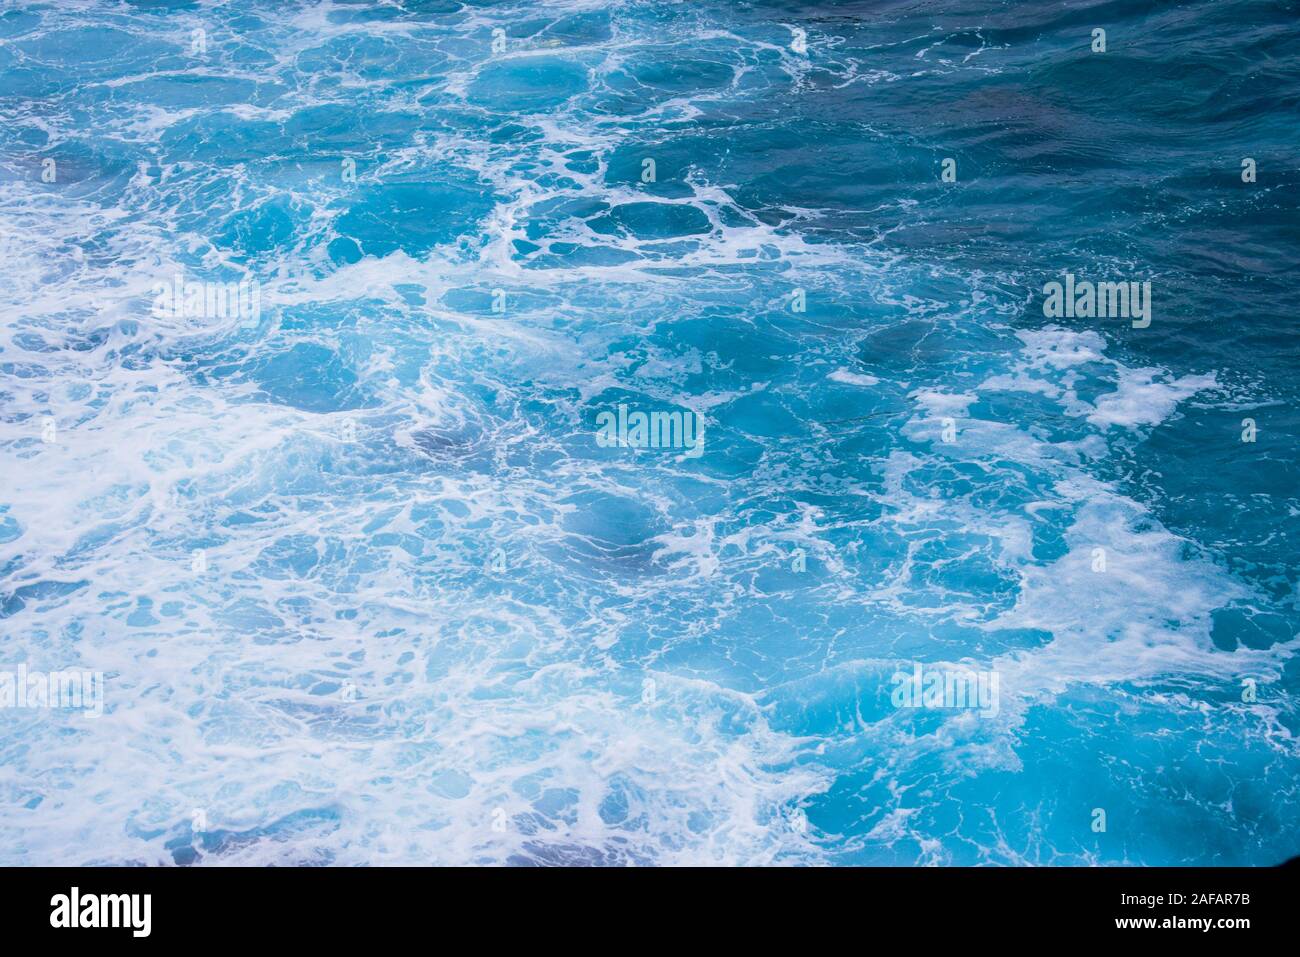 Marble water background, sea wave texture, ocean waves Stock Photo